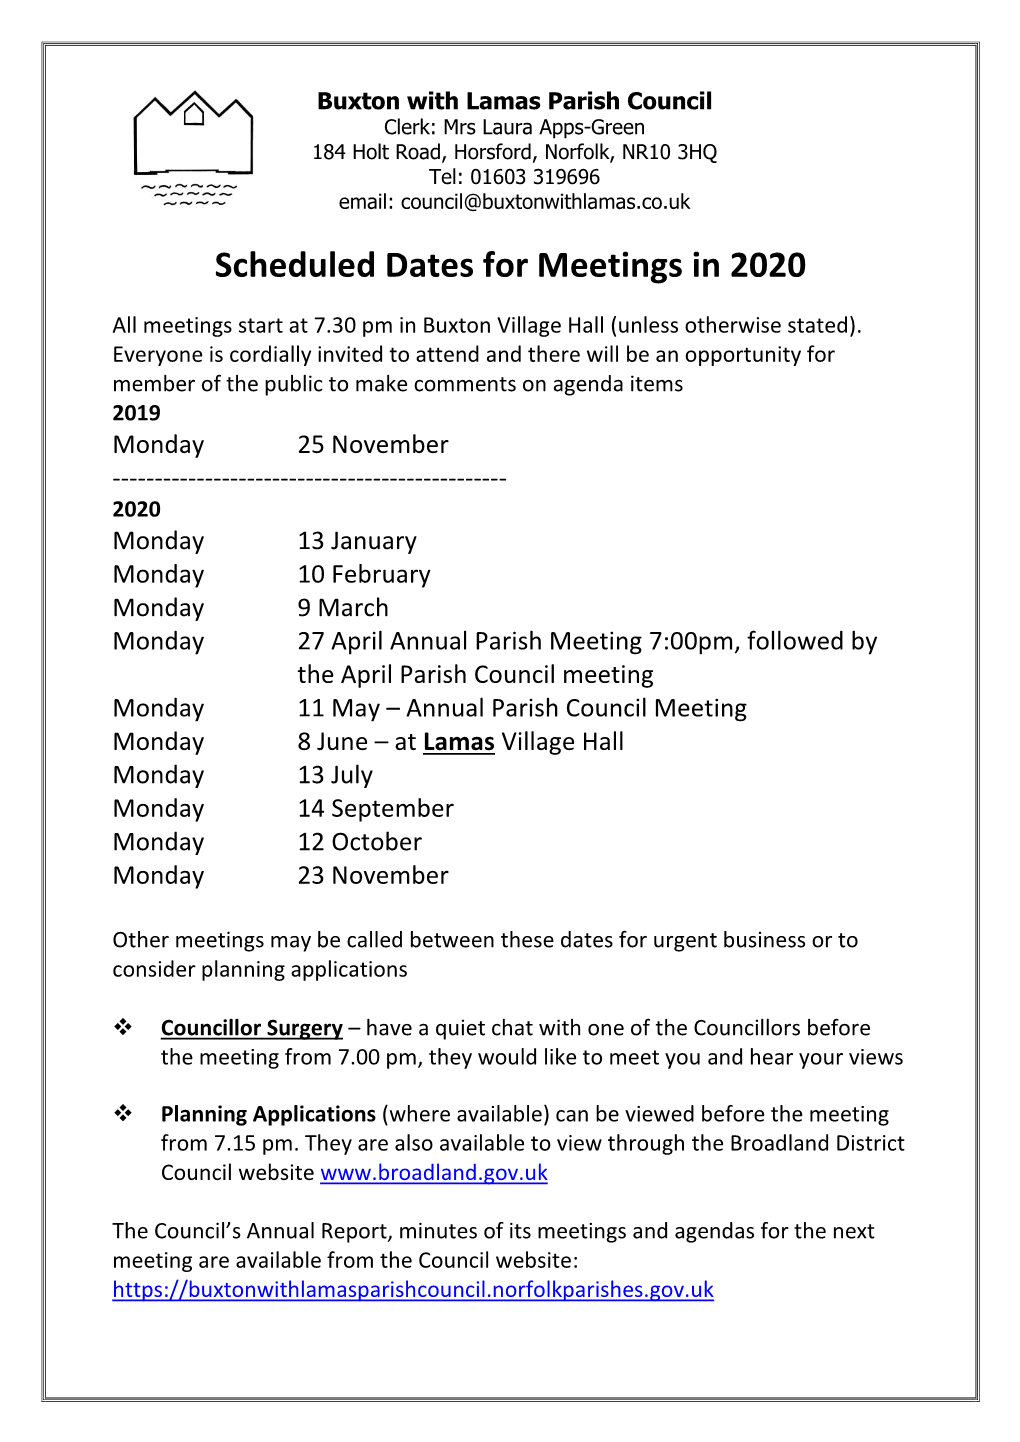 Scheduled Dates for Meetings in 2020